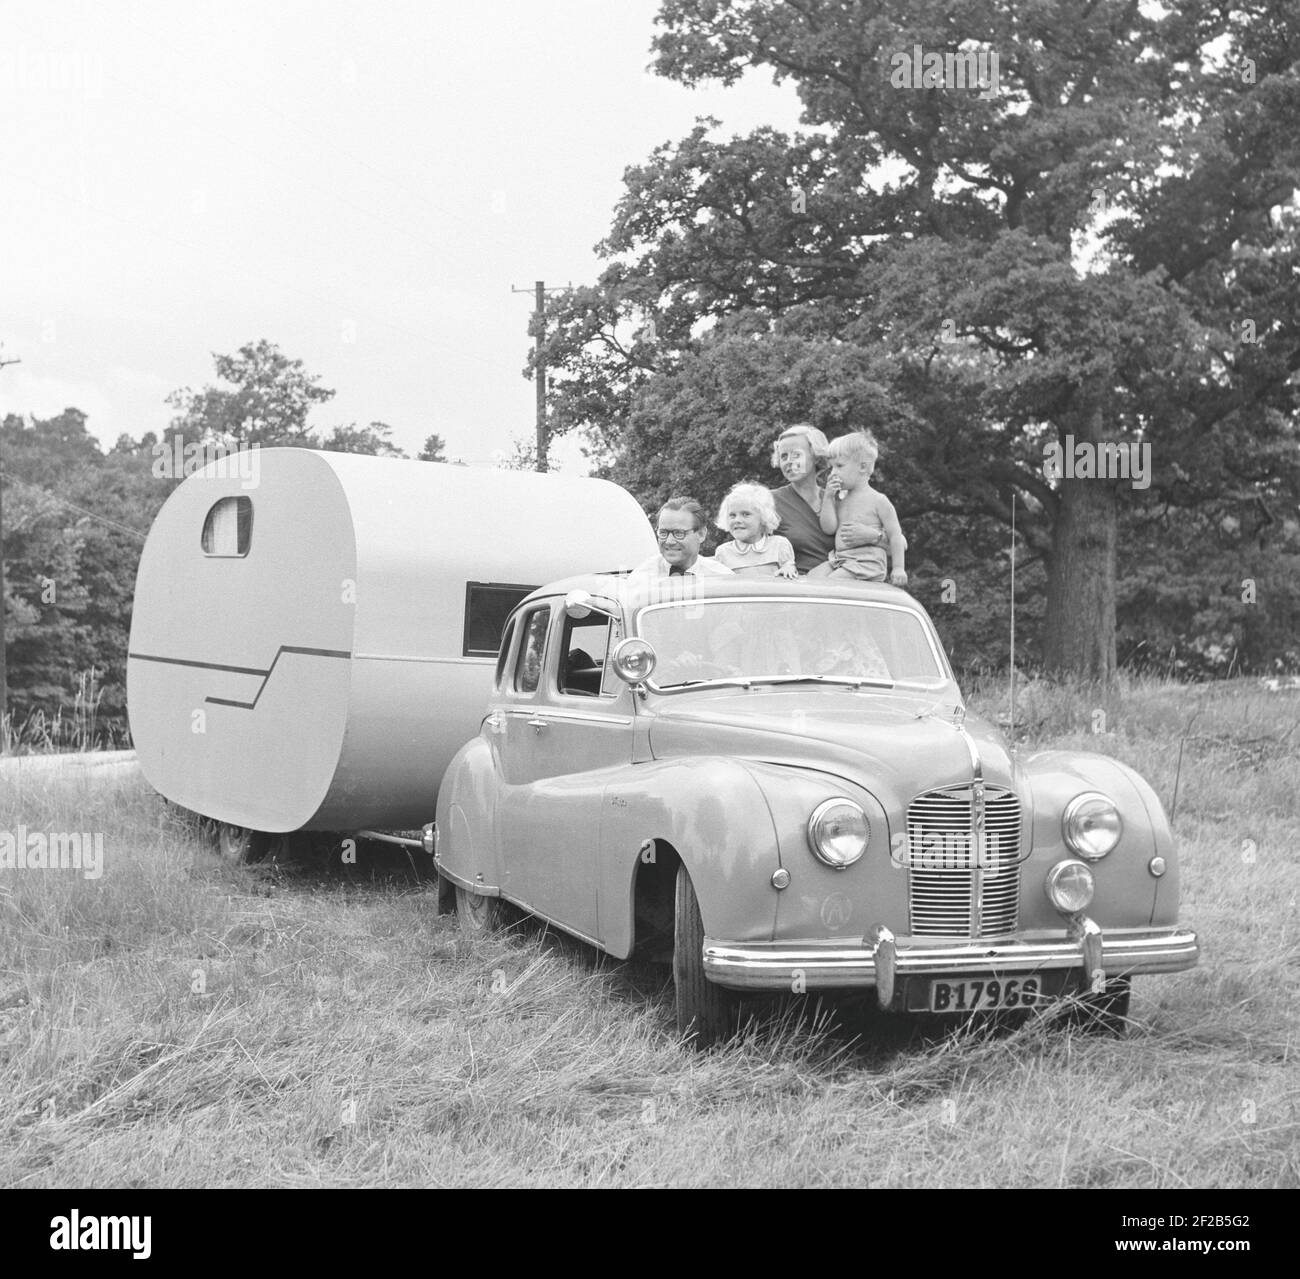 1950s camping. A family in their car and a caravan trailer hooked on ready to go on their summer vacation. The 1950s was the decade when people started to afford their own cars and also take a shorter vacation. Sweden july 1953 Stock Photo